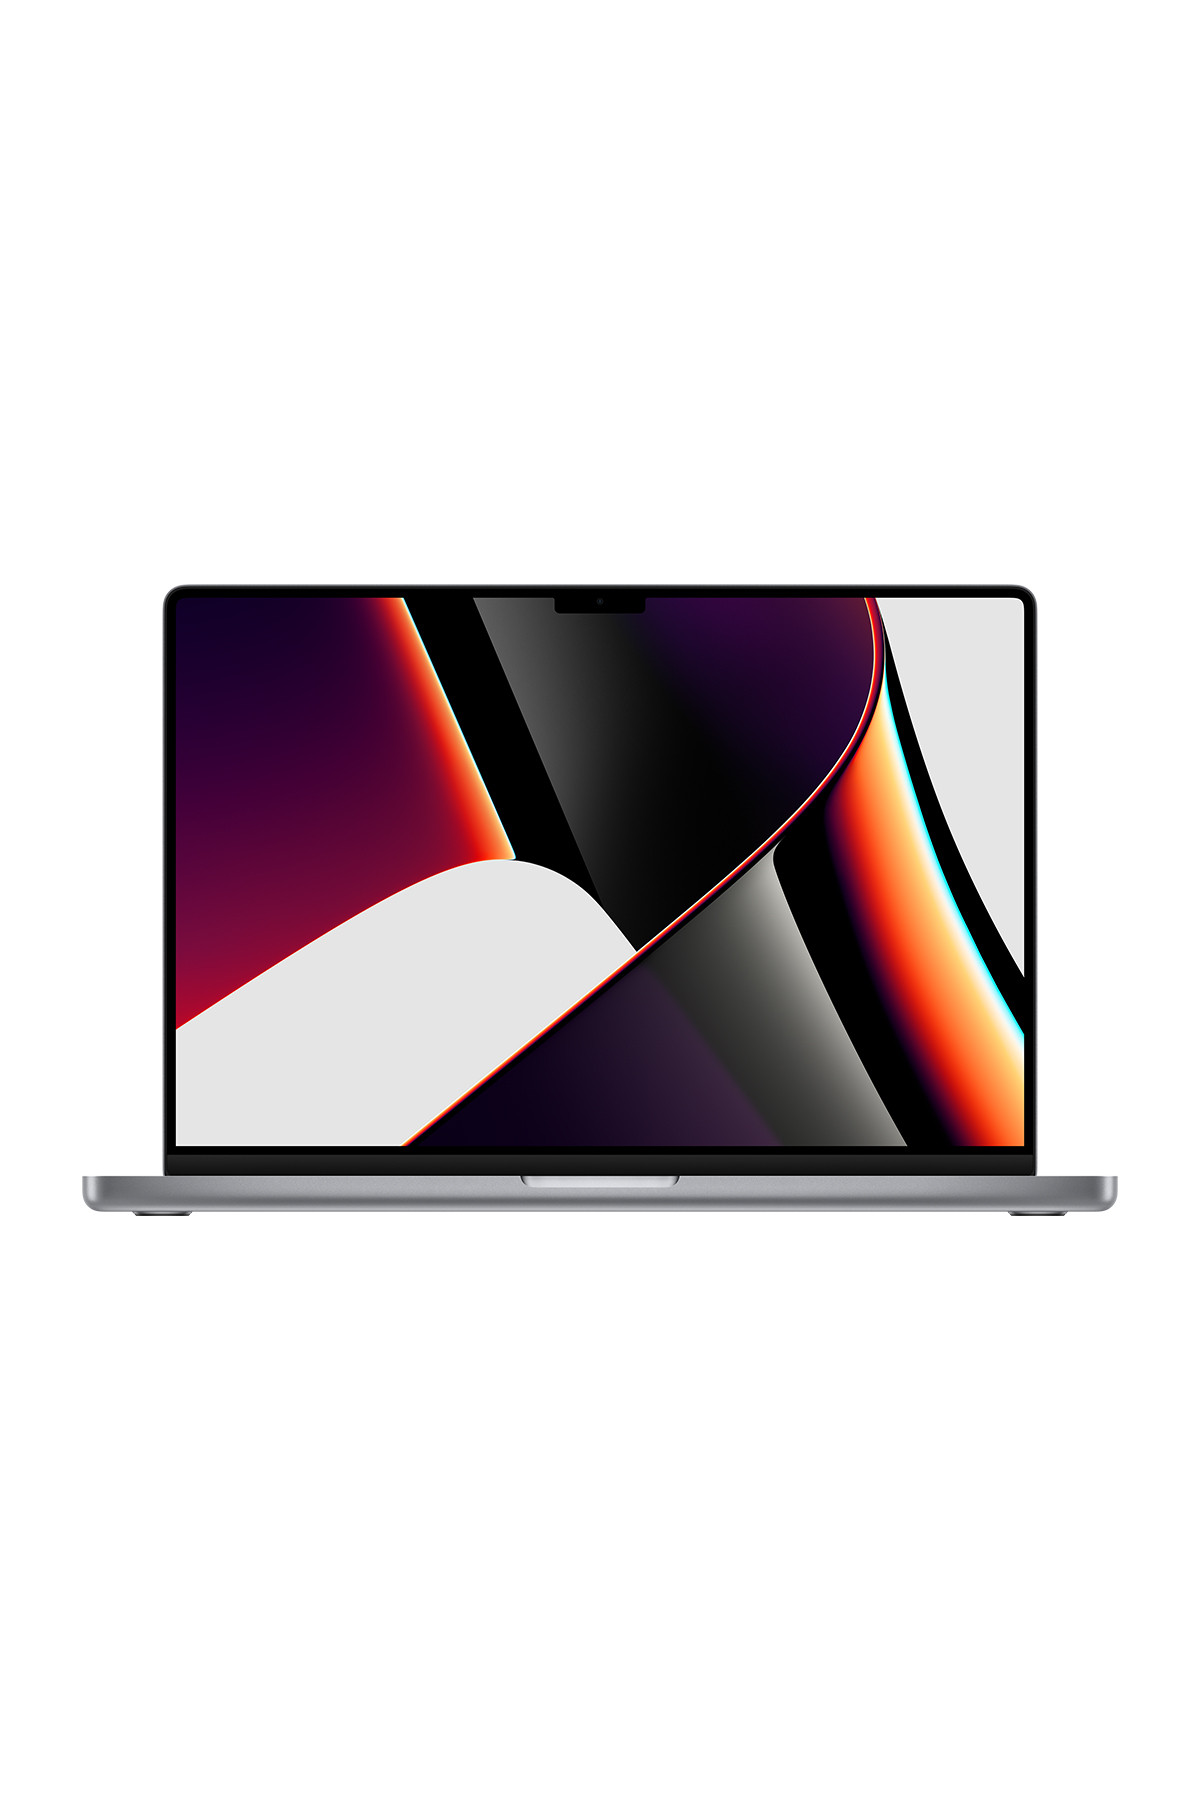 MacBook Pro 16" - Space Grey/Apple M1 Pro Chip with 10‑CORE CPU and 16‑CORE GPU/16GB/1TB SSD